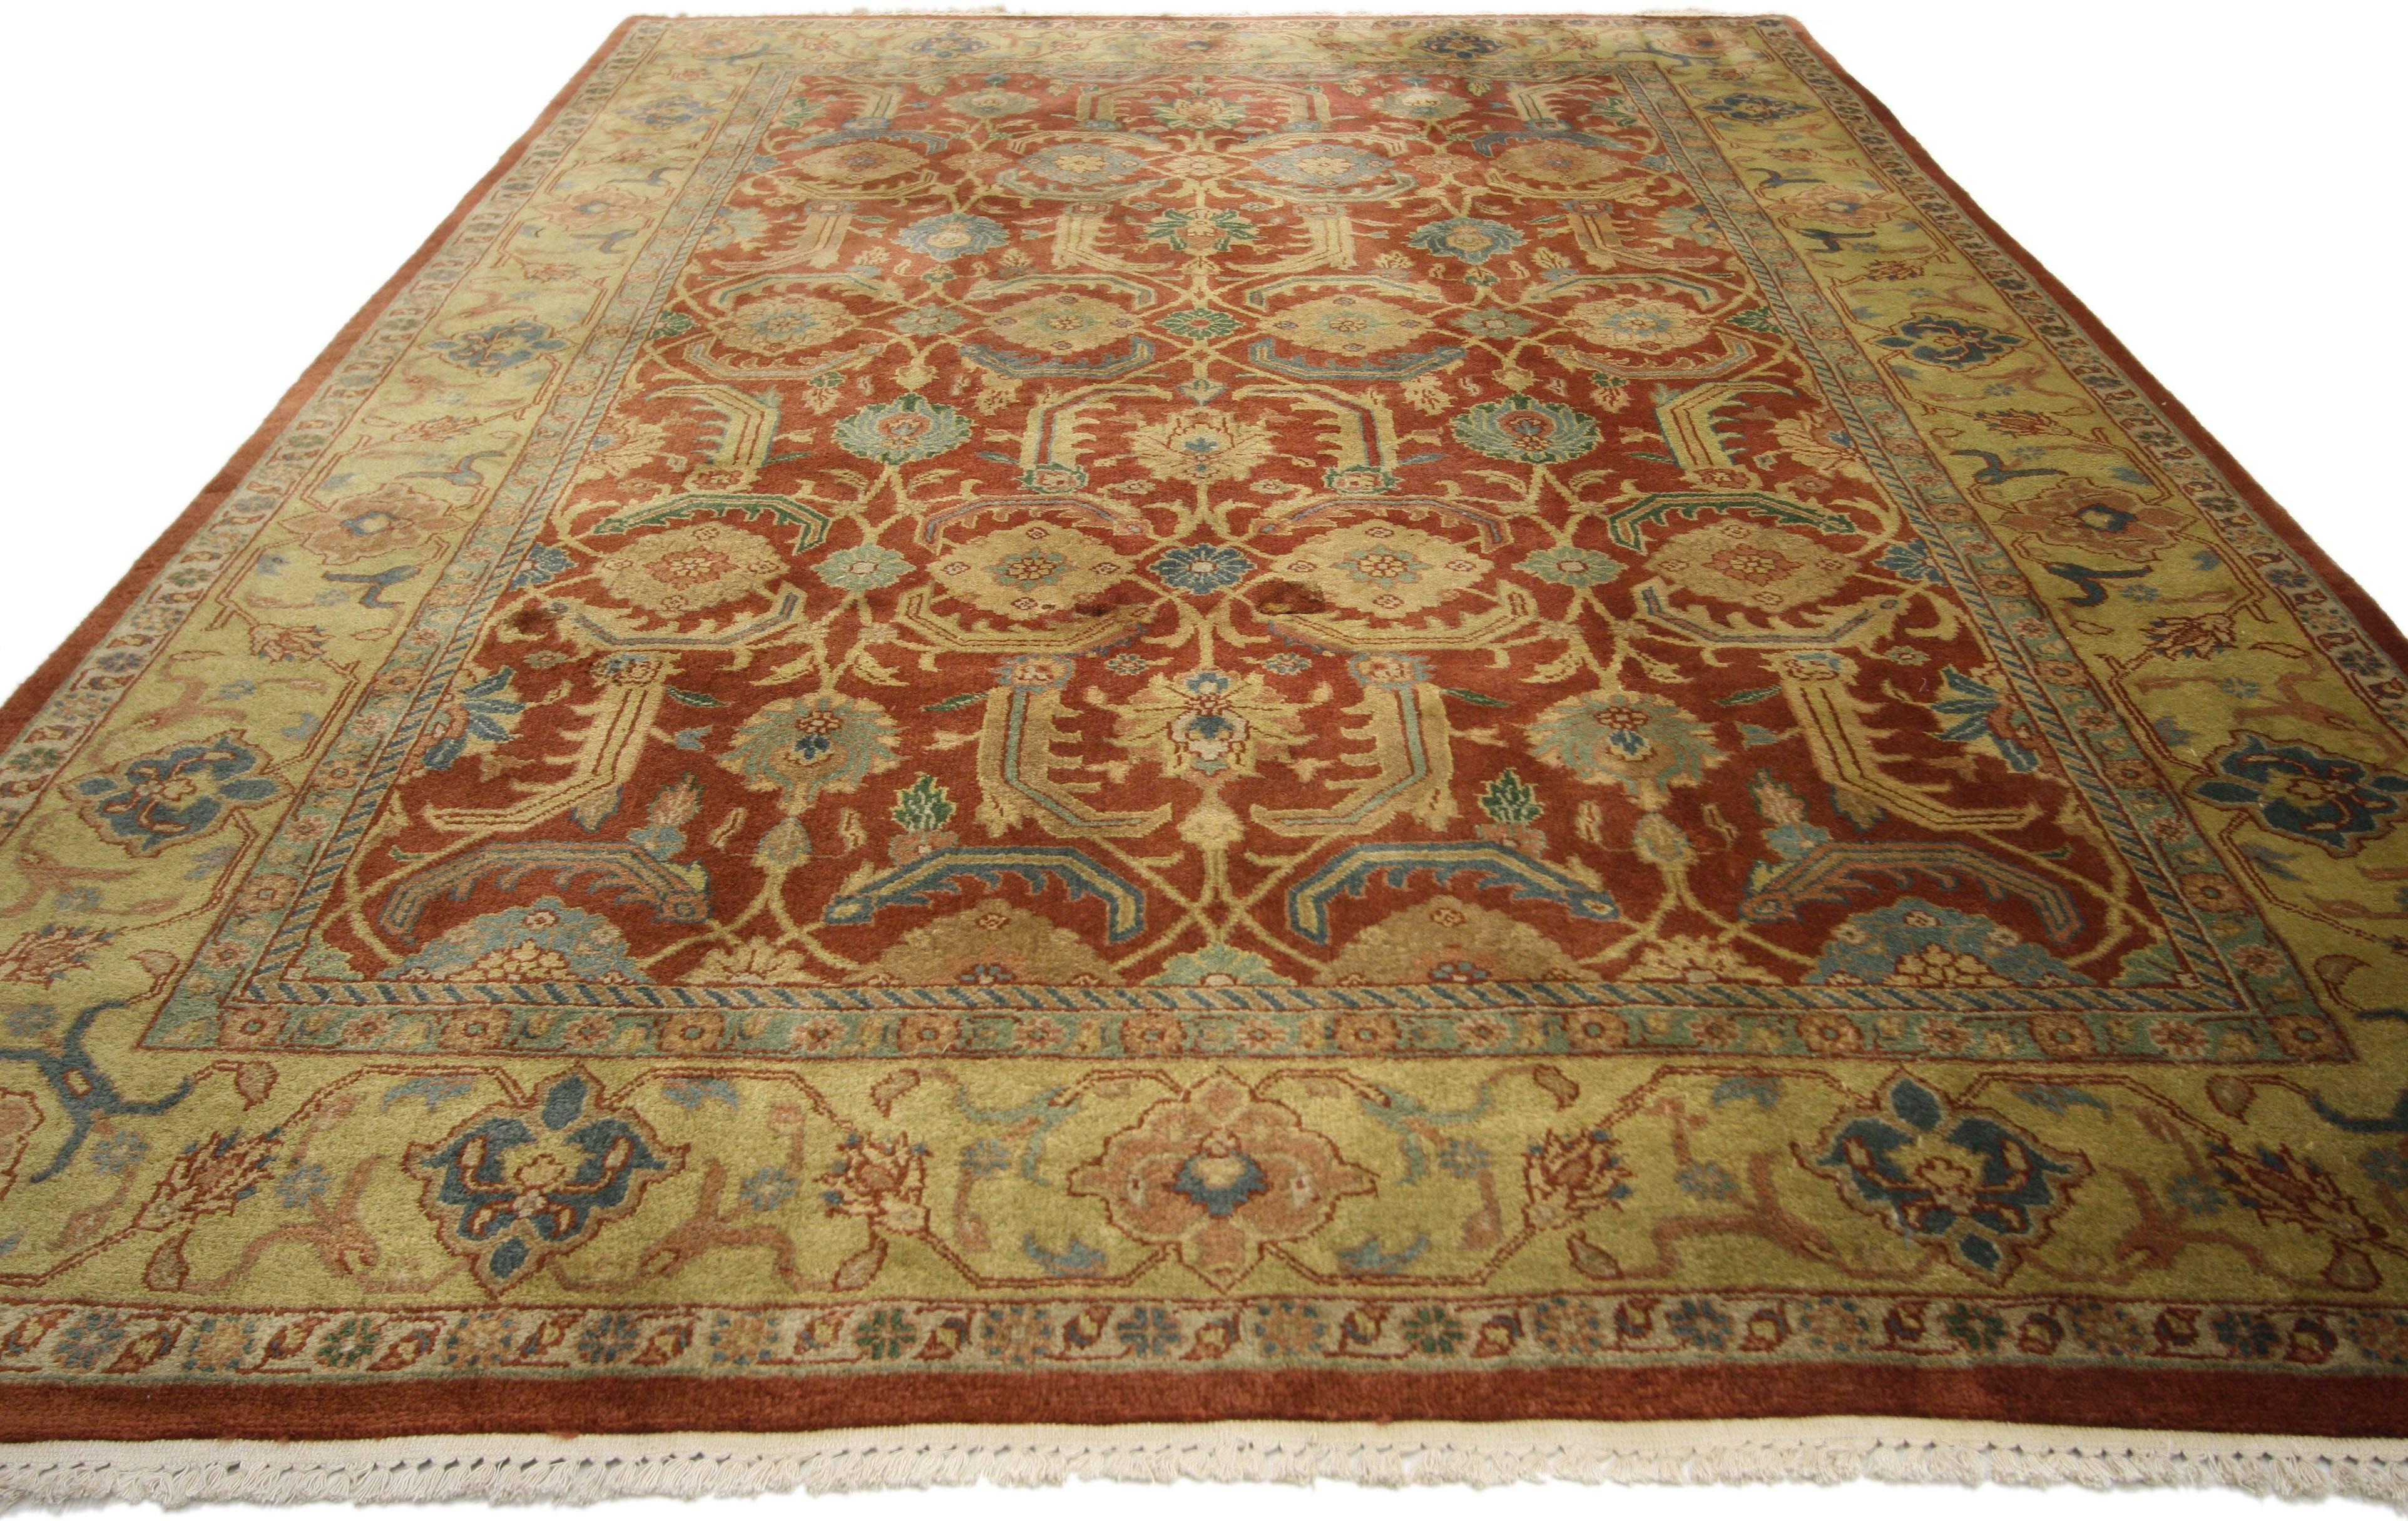 74382, vintage Indian area rug with traditional Persian style. This hand-knotted wool vintage Indian area rug with traditional Persian style features a bold all-over floral lattice pattern of repeating round blossoms surrounded by serrated leaves